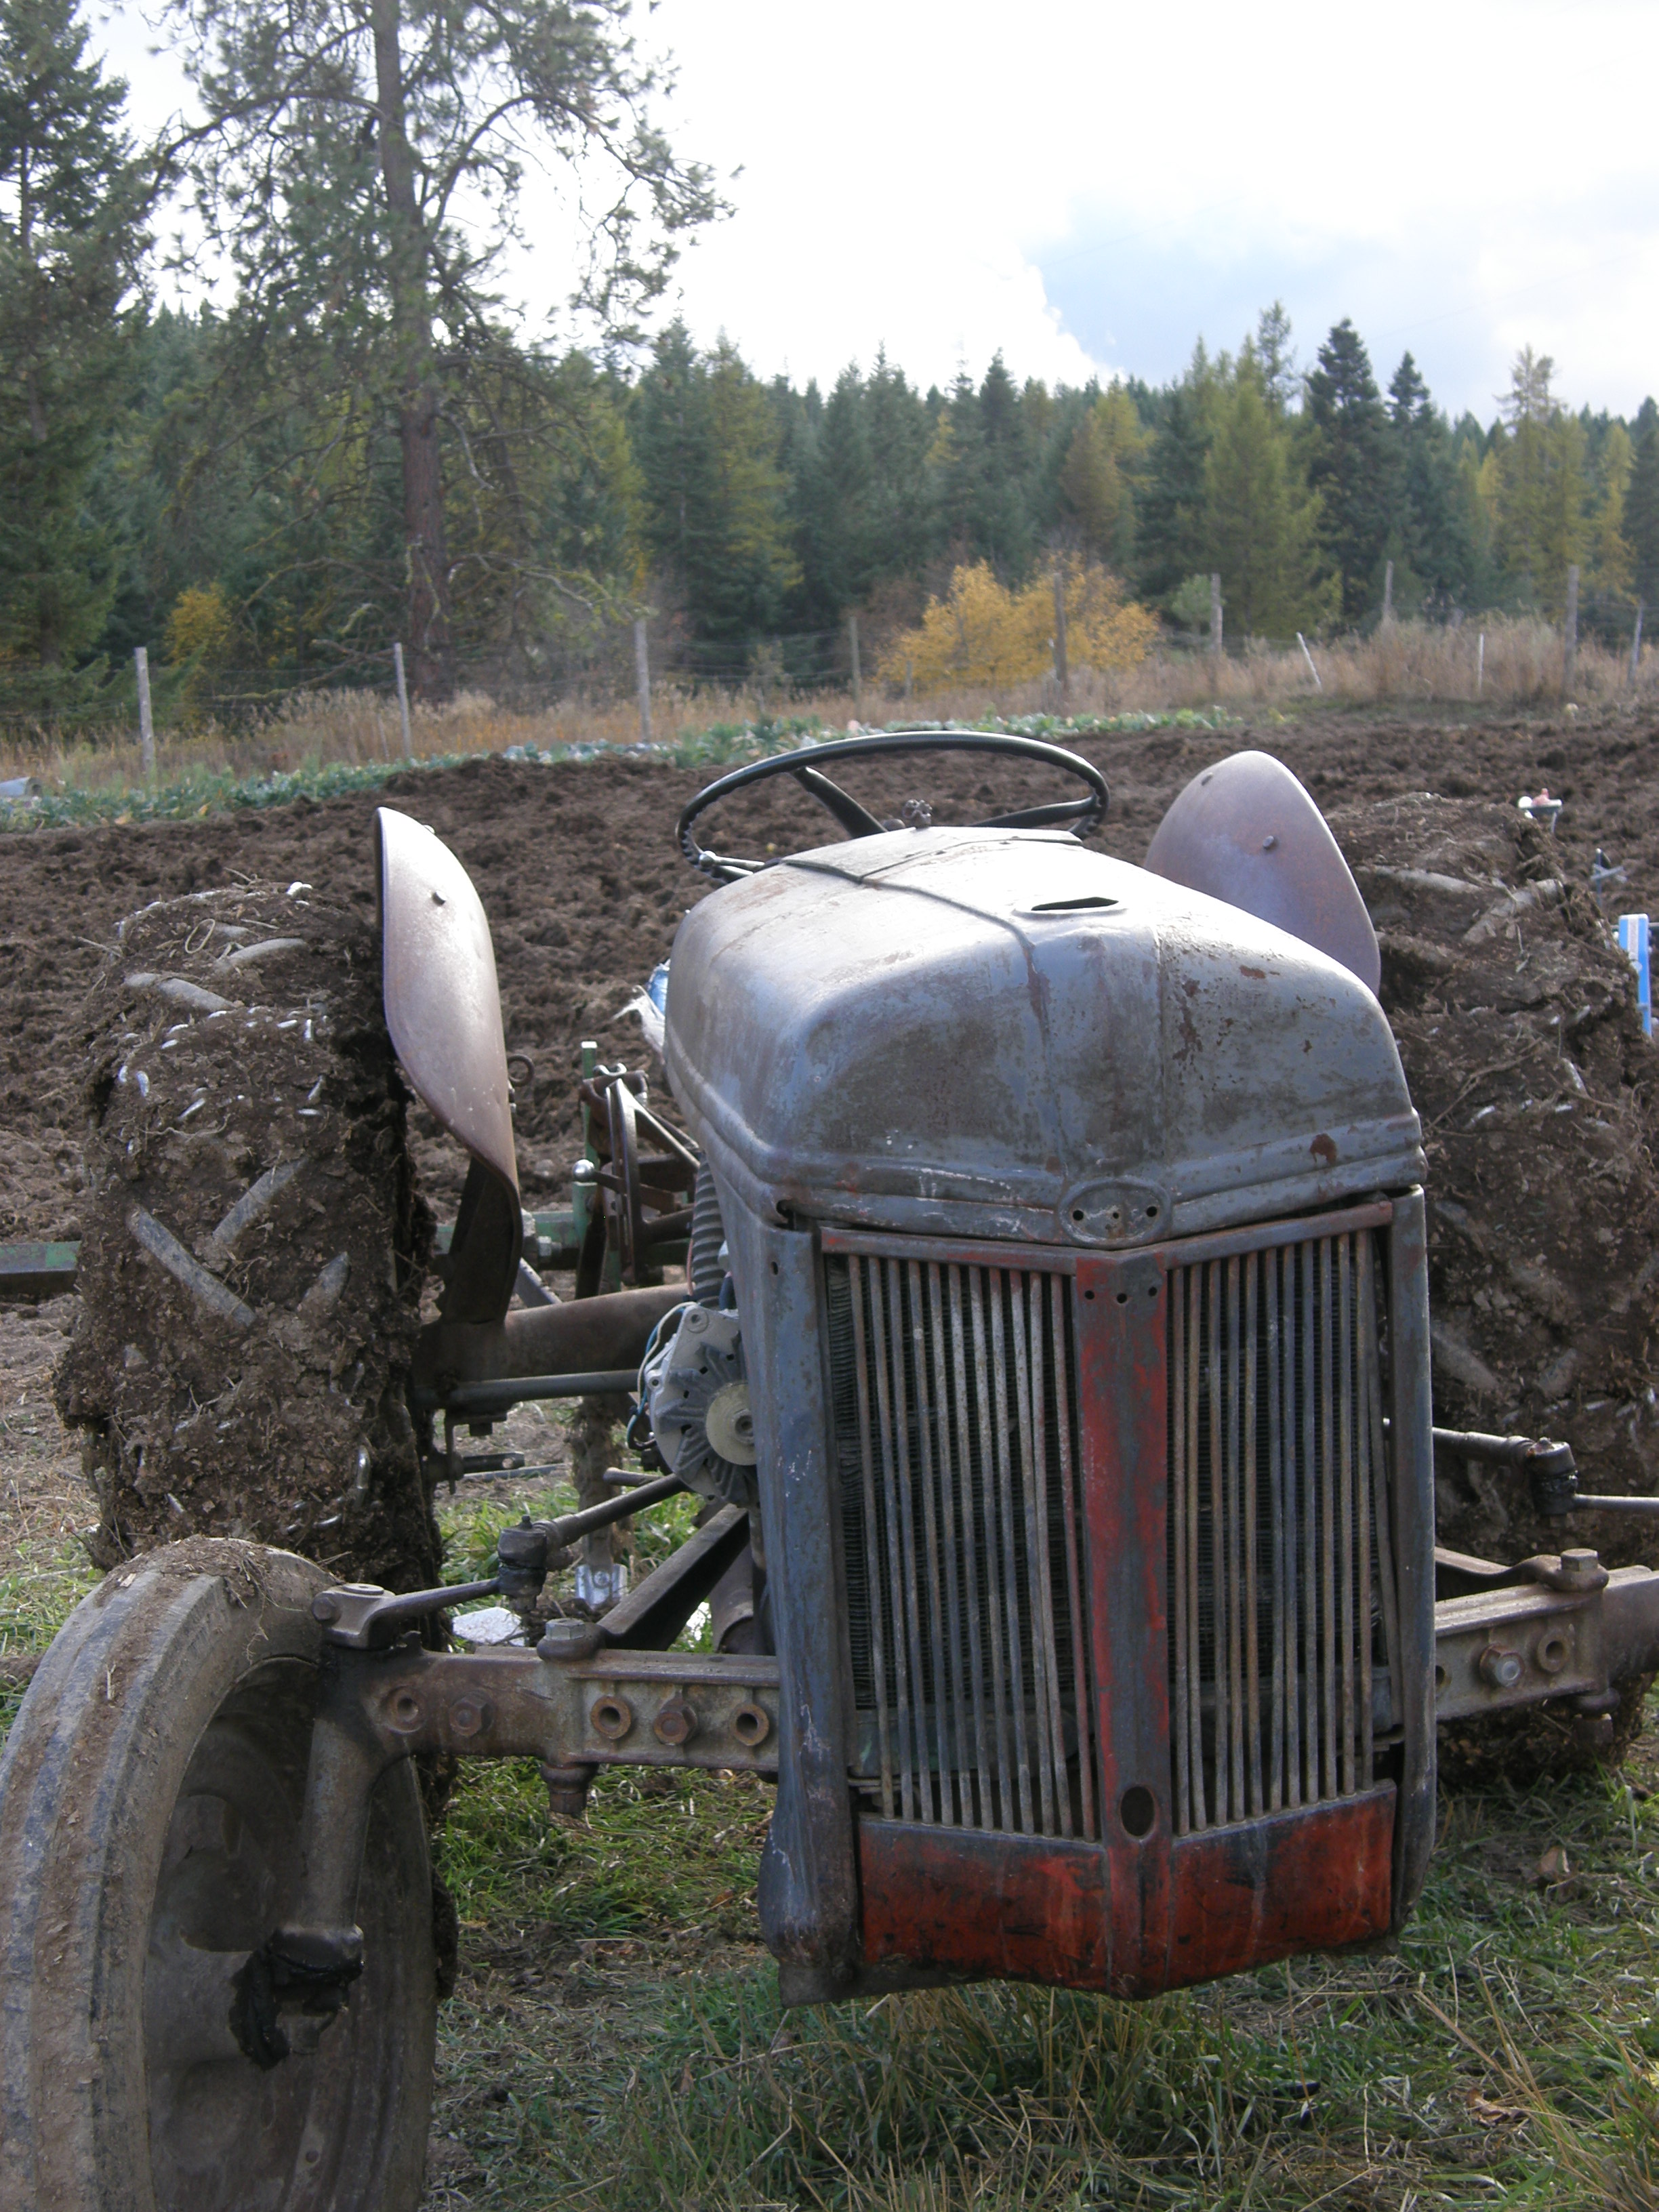 The tractor in the fall garden.